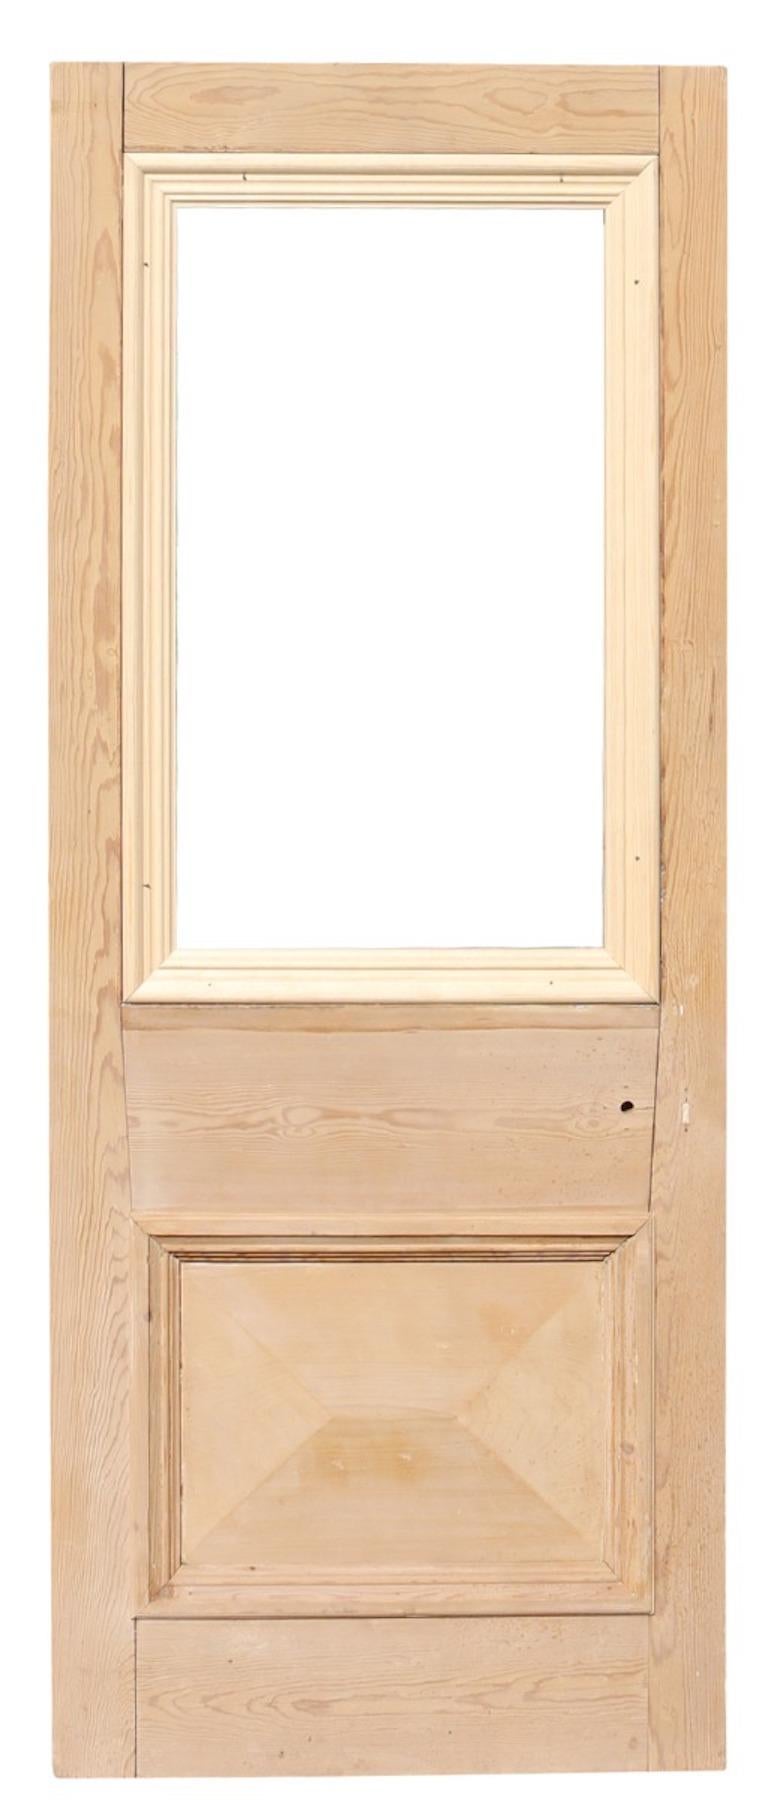 A reclaimed door suitable for interior or exterior use, constructed from pine, with space for a single glazed panel.